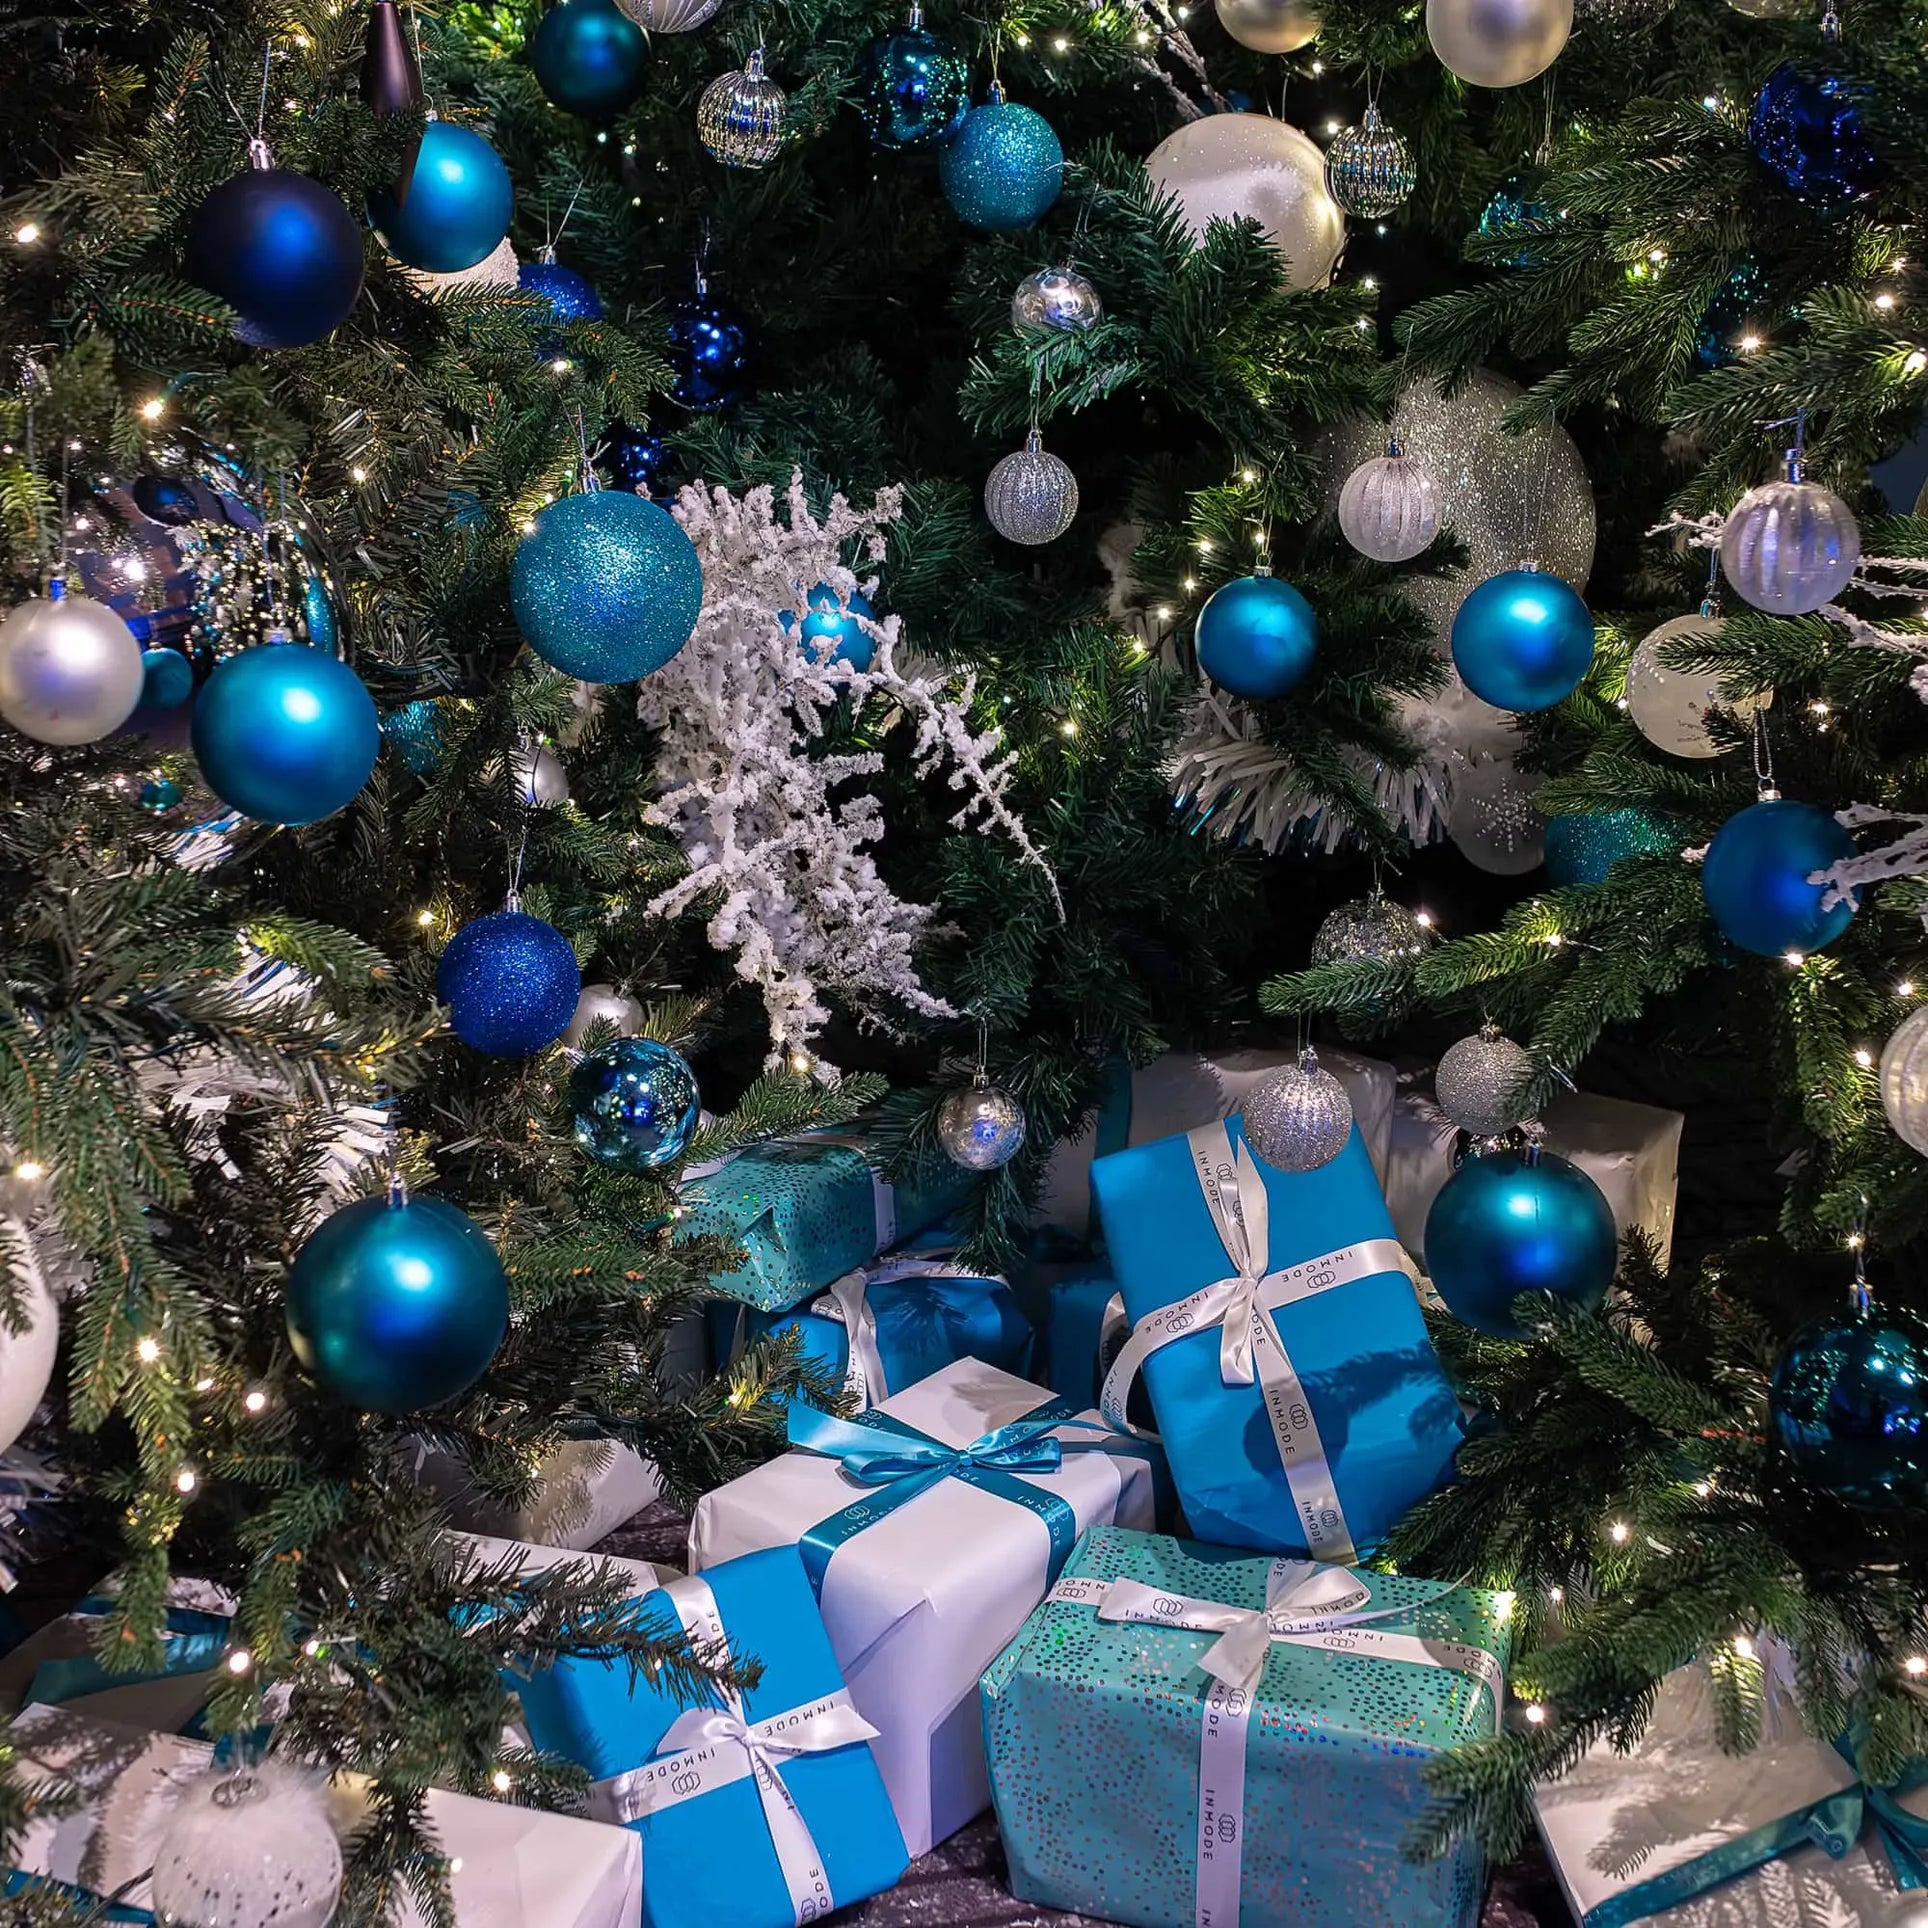 Details of a A Christmas tree richly adorned with blue and silver baubles, sparkling lights, and white decorative snowflakes, surrounded by a collection of presents wrapped in blue and white paper with ribbons.